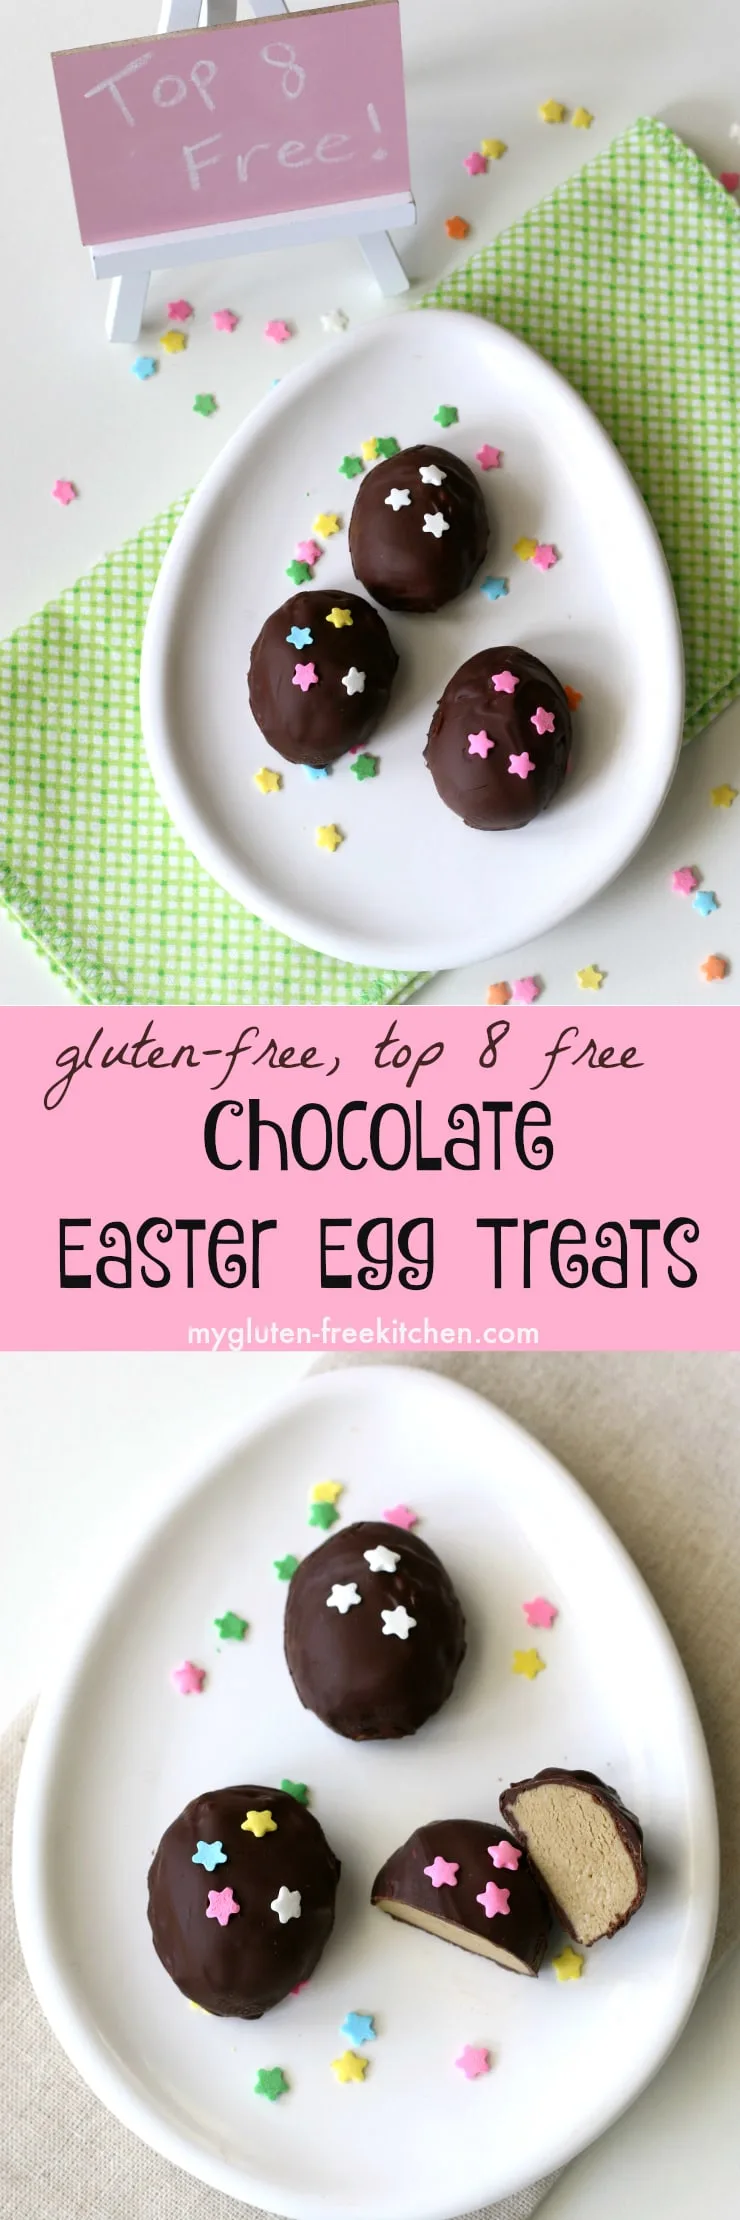 Gluten-free Top 8 free Chocolate Easter Egg Treats recipe. Perfect for class parties or to make with your kids!